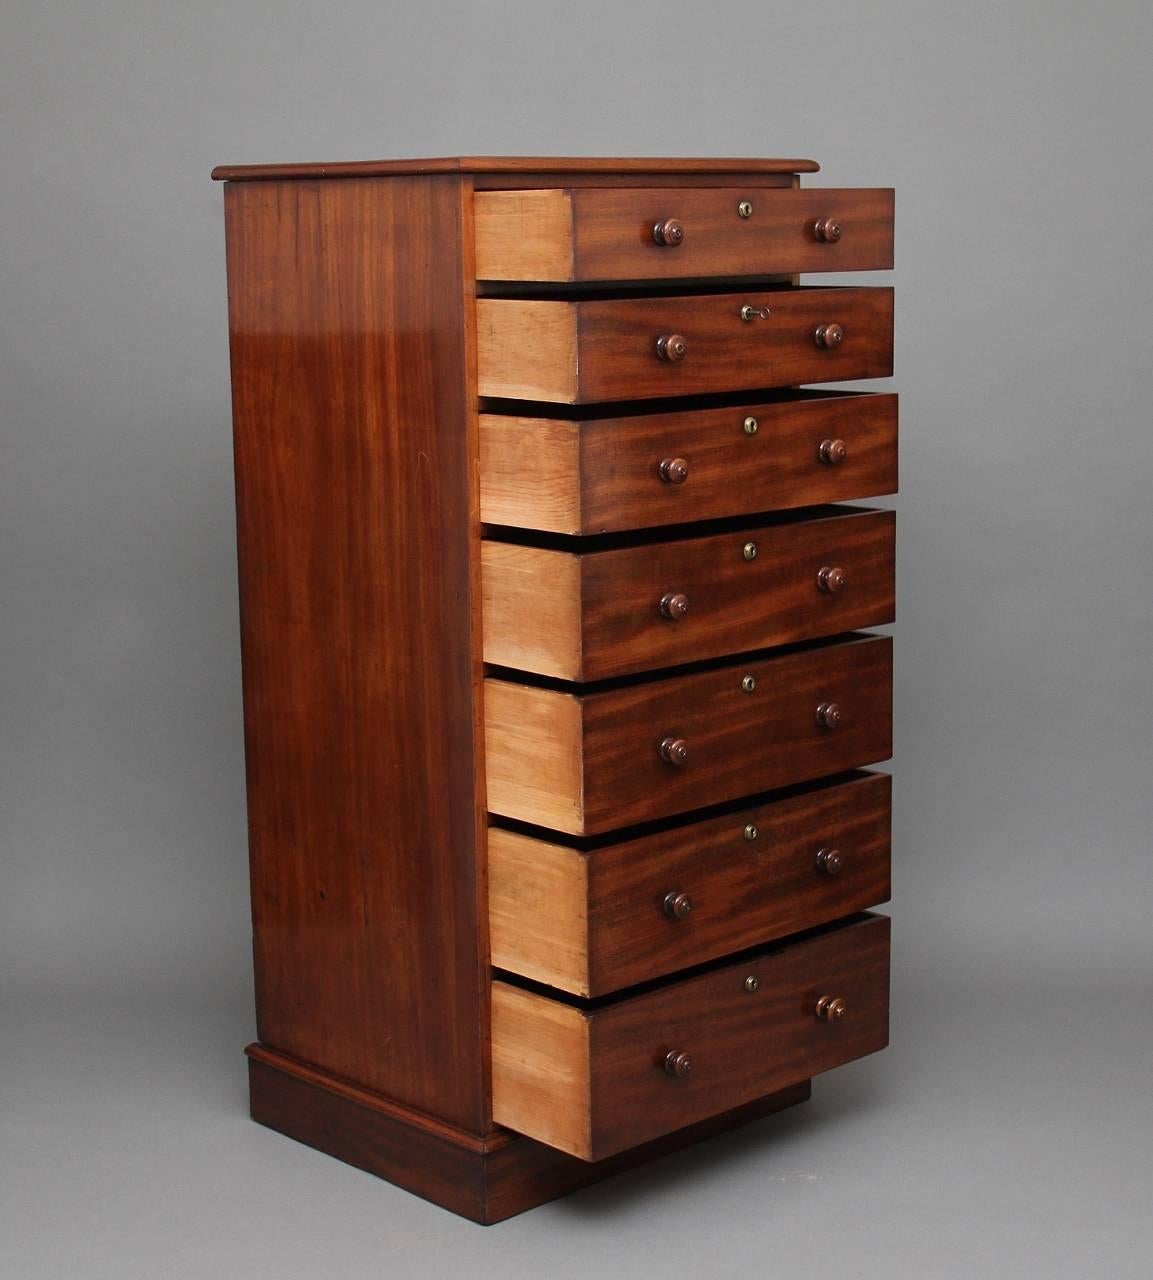 A tall 19th century mahogany chest in excellent condition, with a moulded edge top, with seven graduated drawers with original turned wooden knobs, standing on a plinth base, circa 1840.